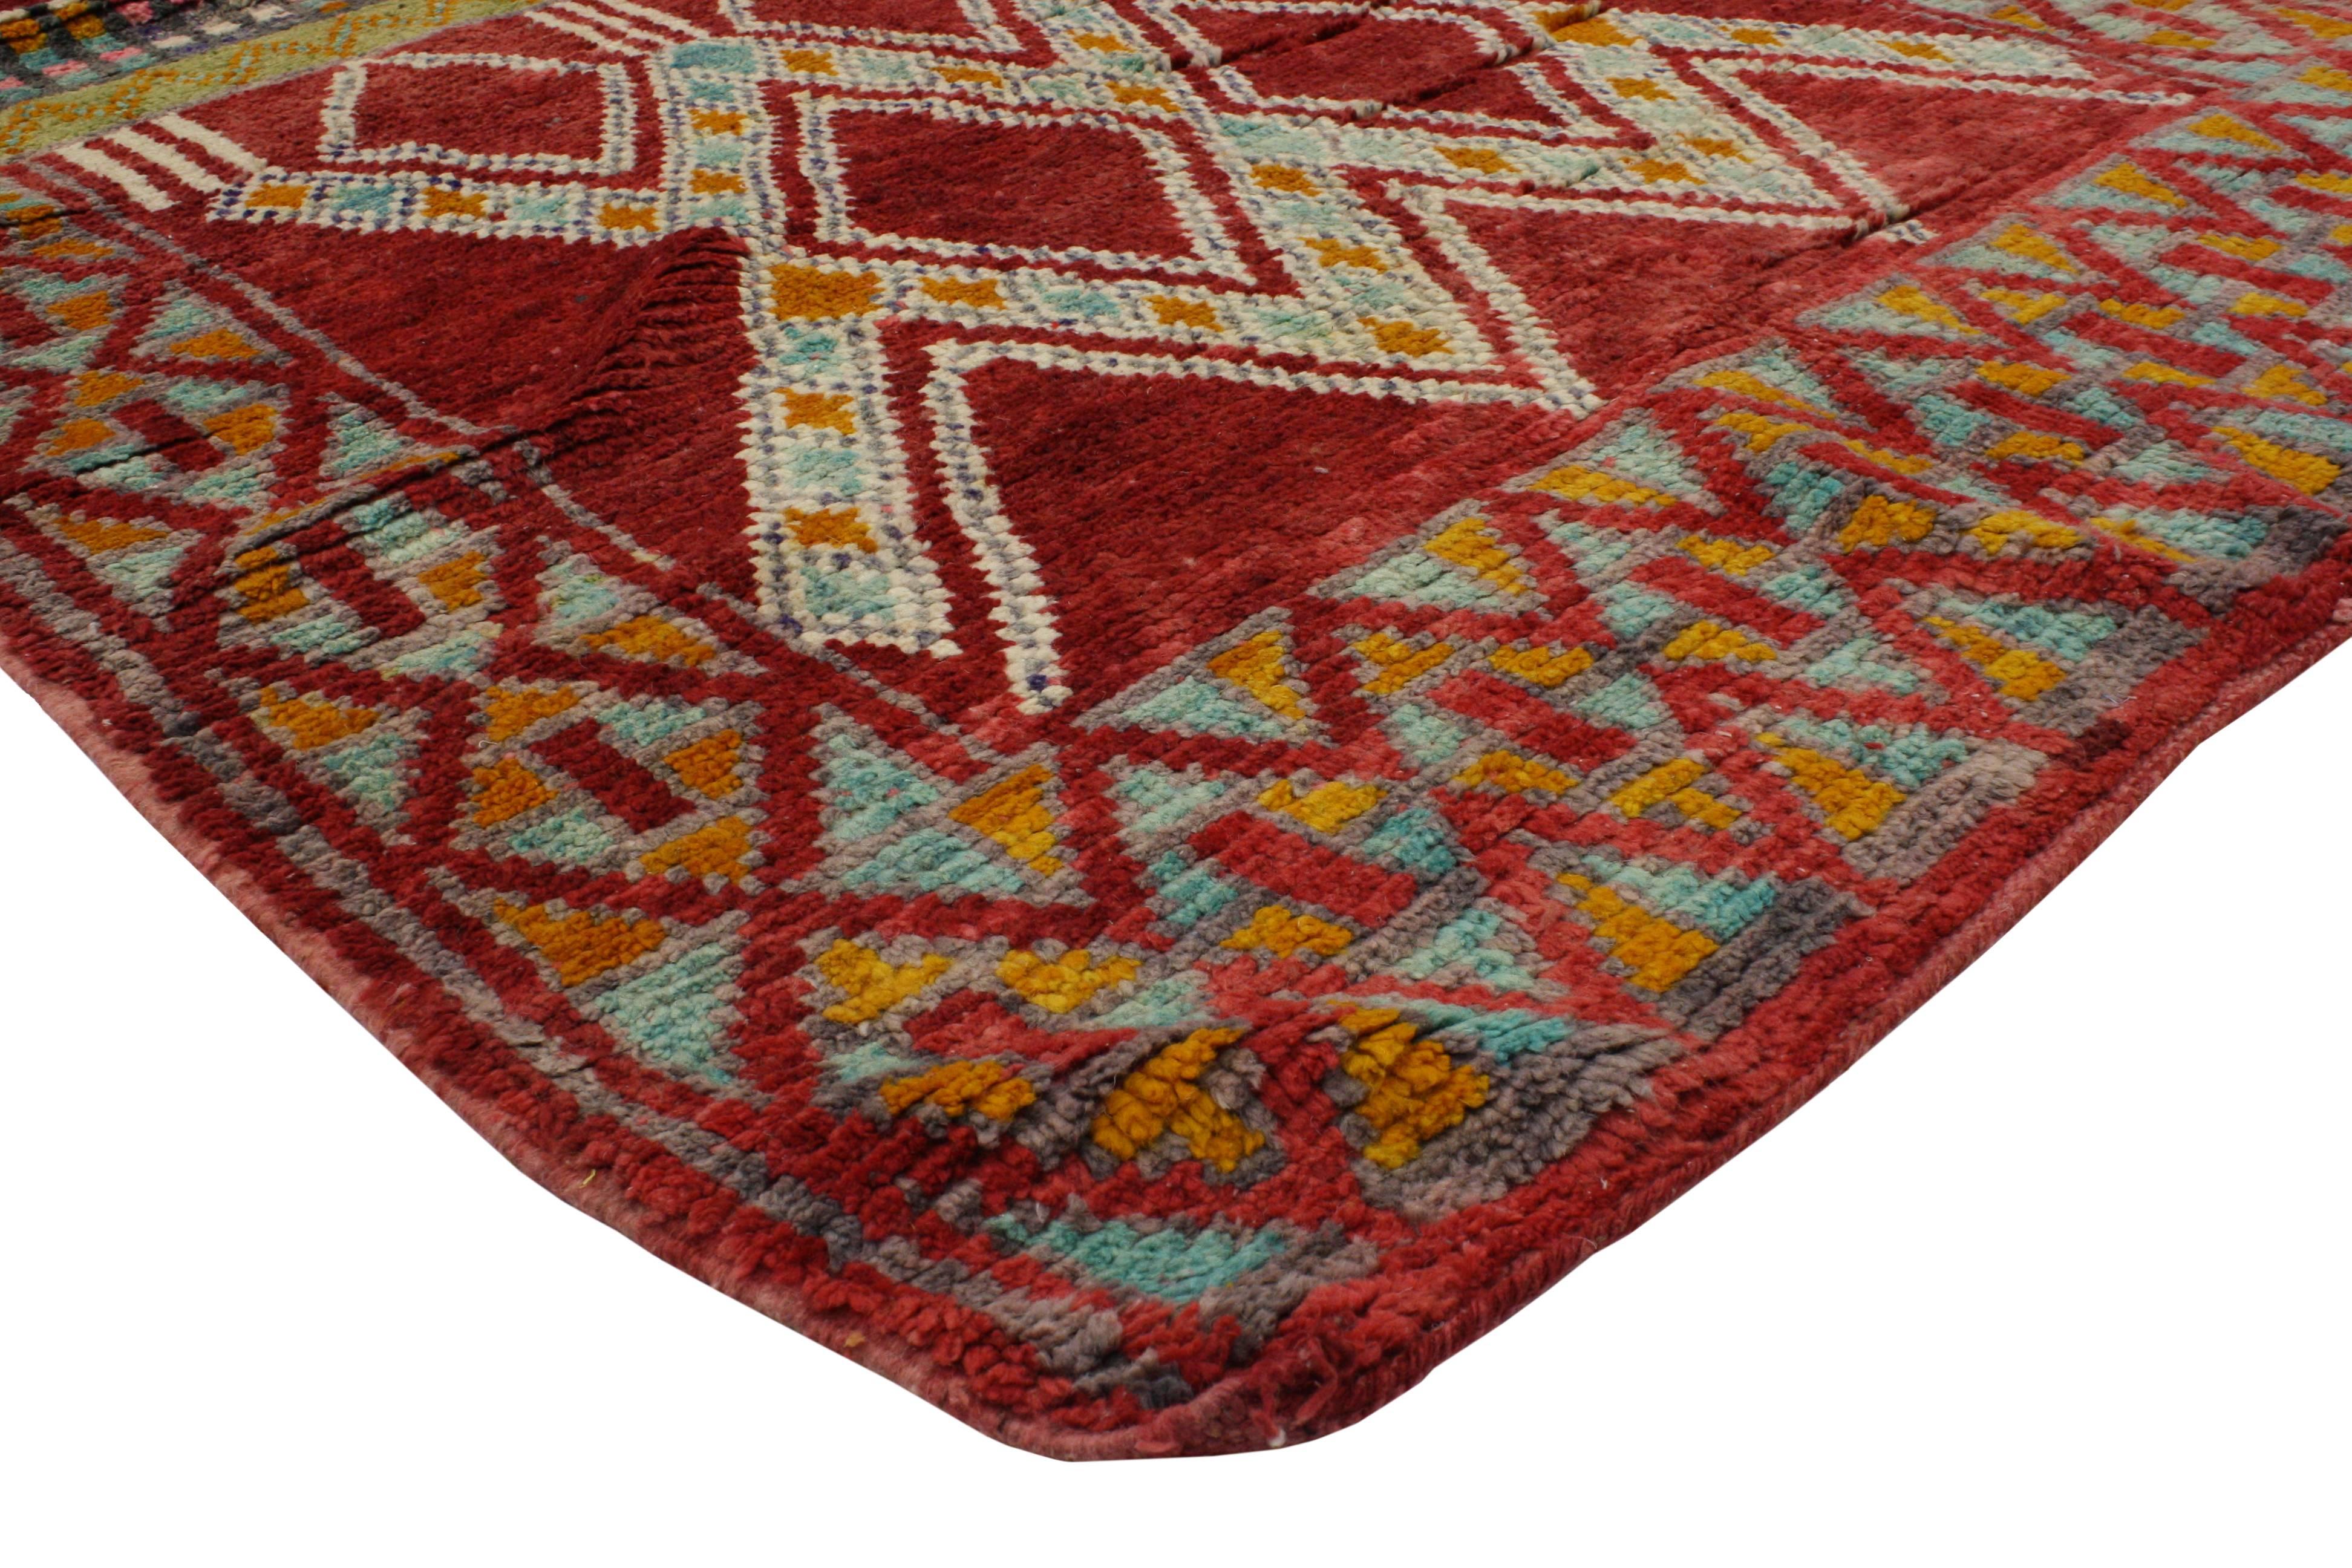 Wool Mid-Century Modern Berber Moroccan Rug with Modern Tribal Style